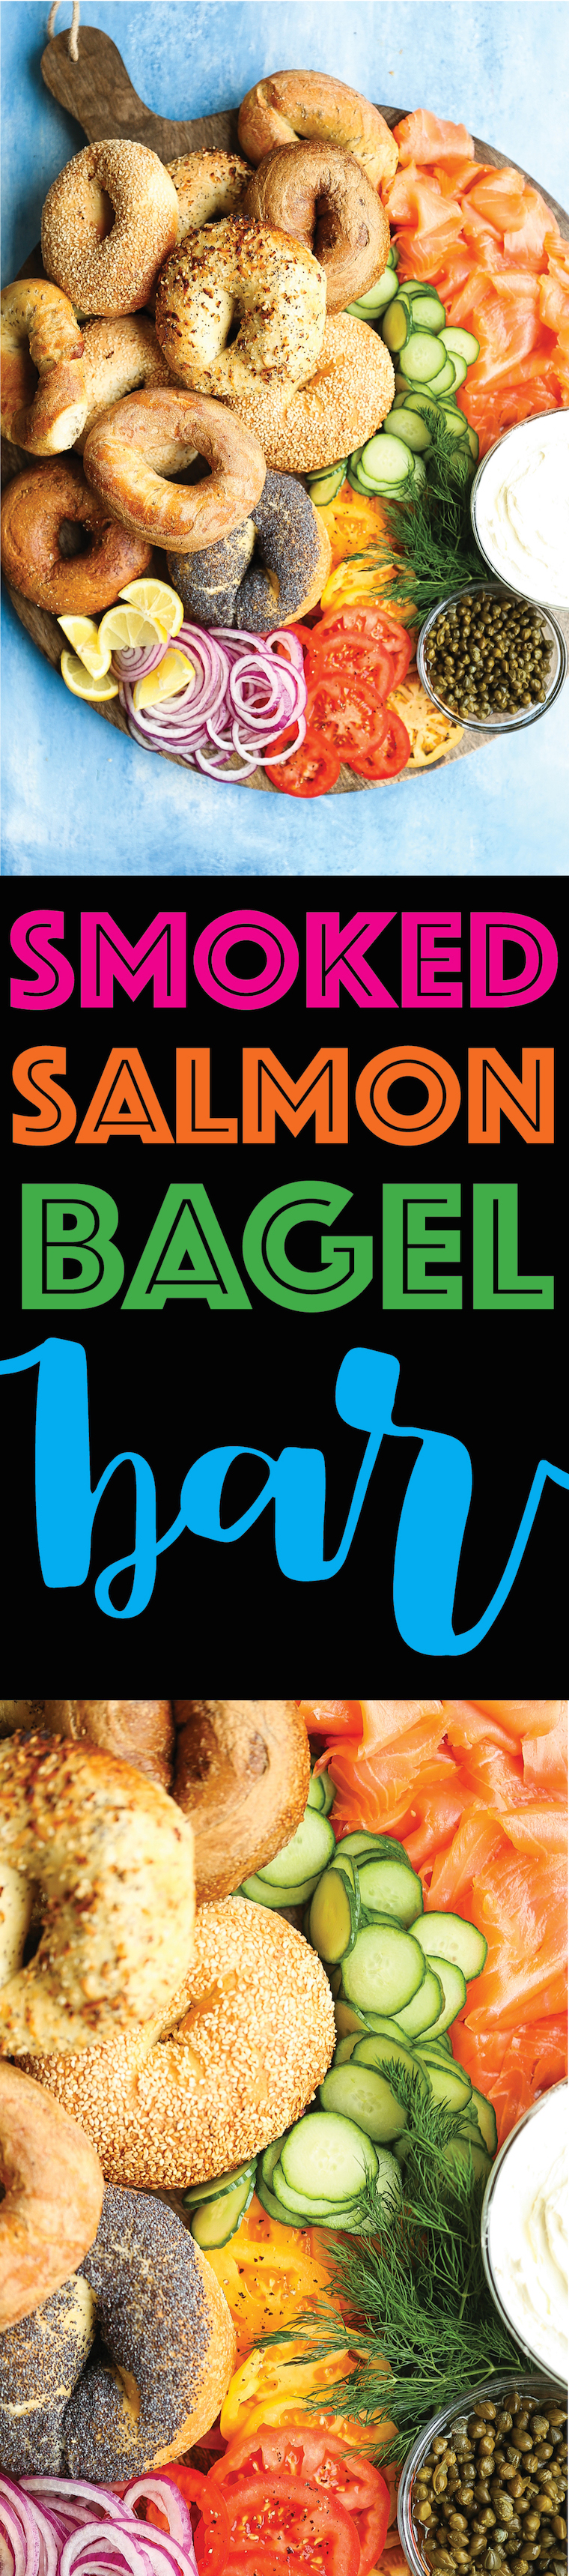 Smoked Salmon Bagel Bar - How to set up the most perfect (yet easiest!) bagel bar! Perfect for brunches and get-togethers! Everyone will be so impressed!